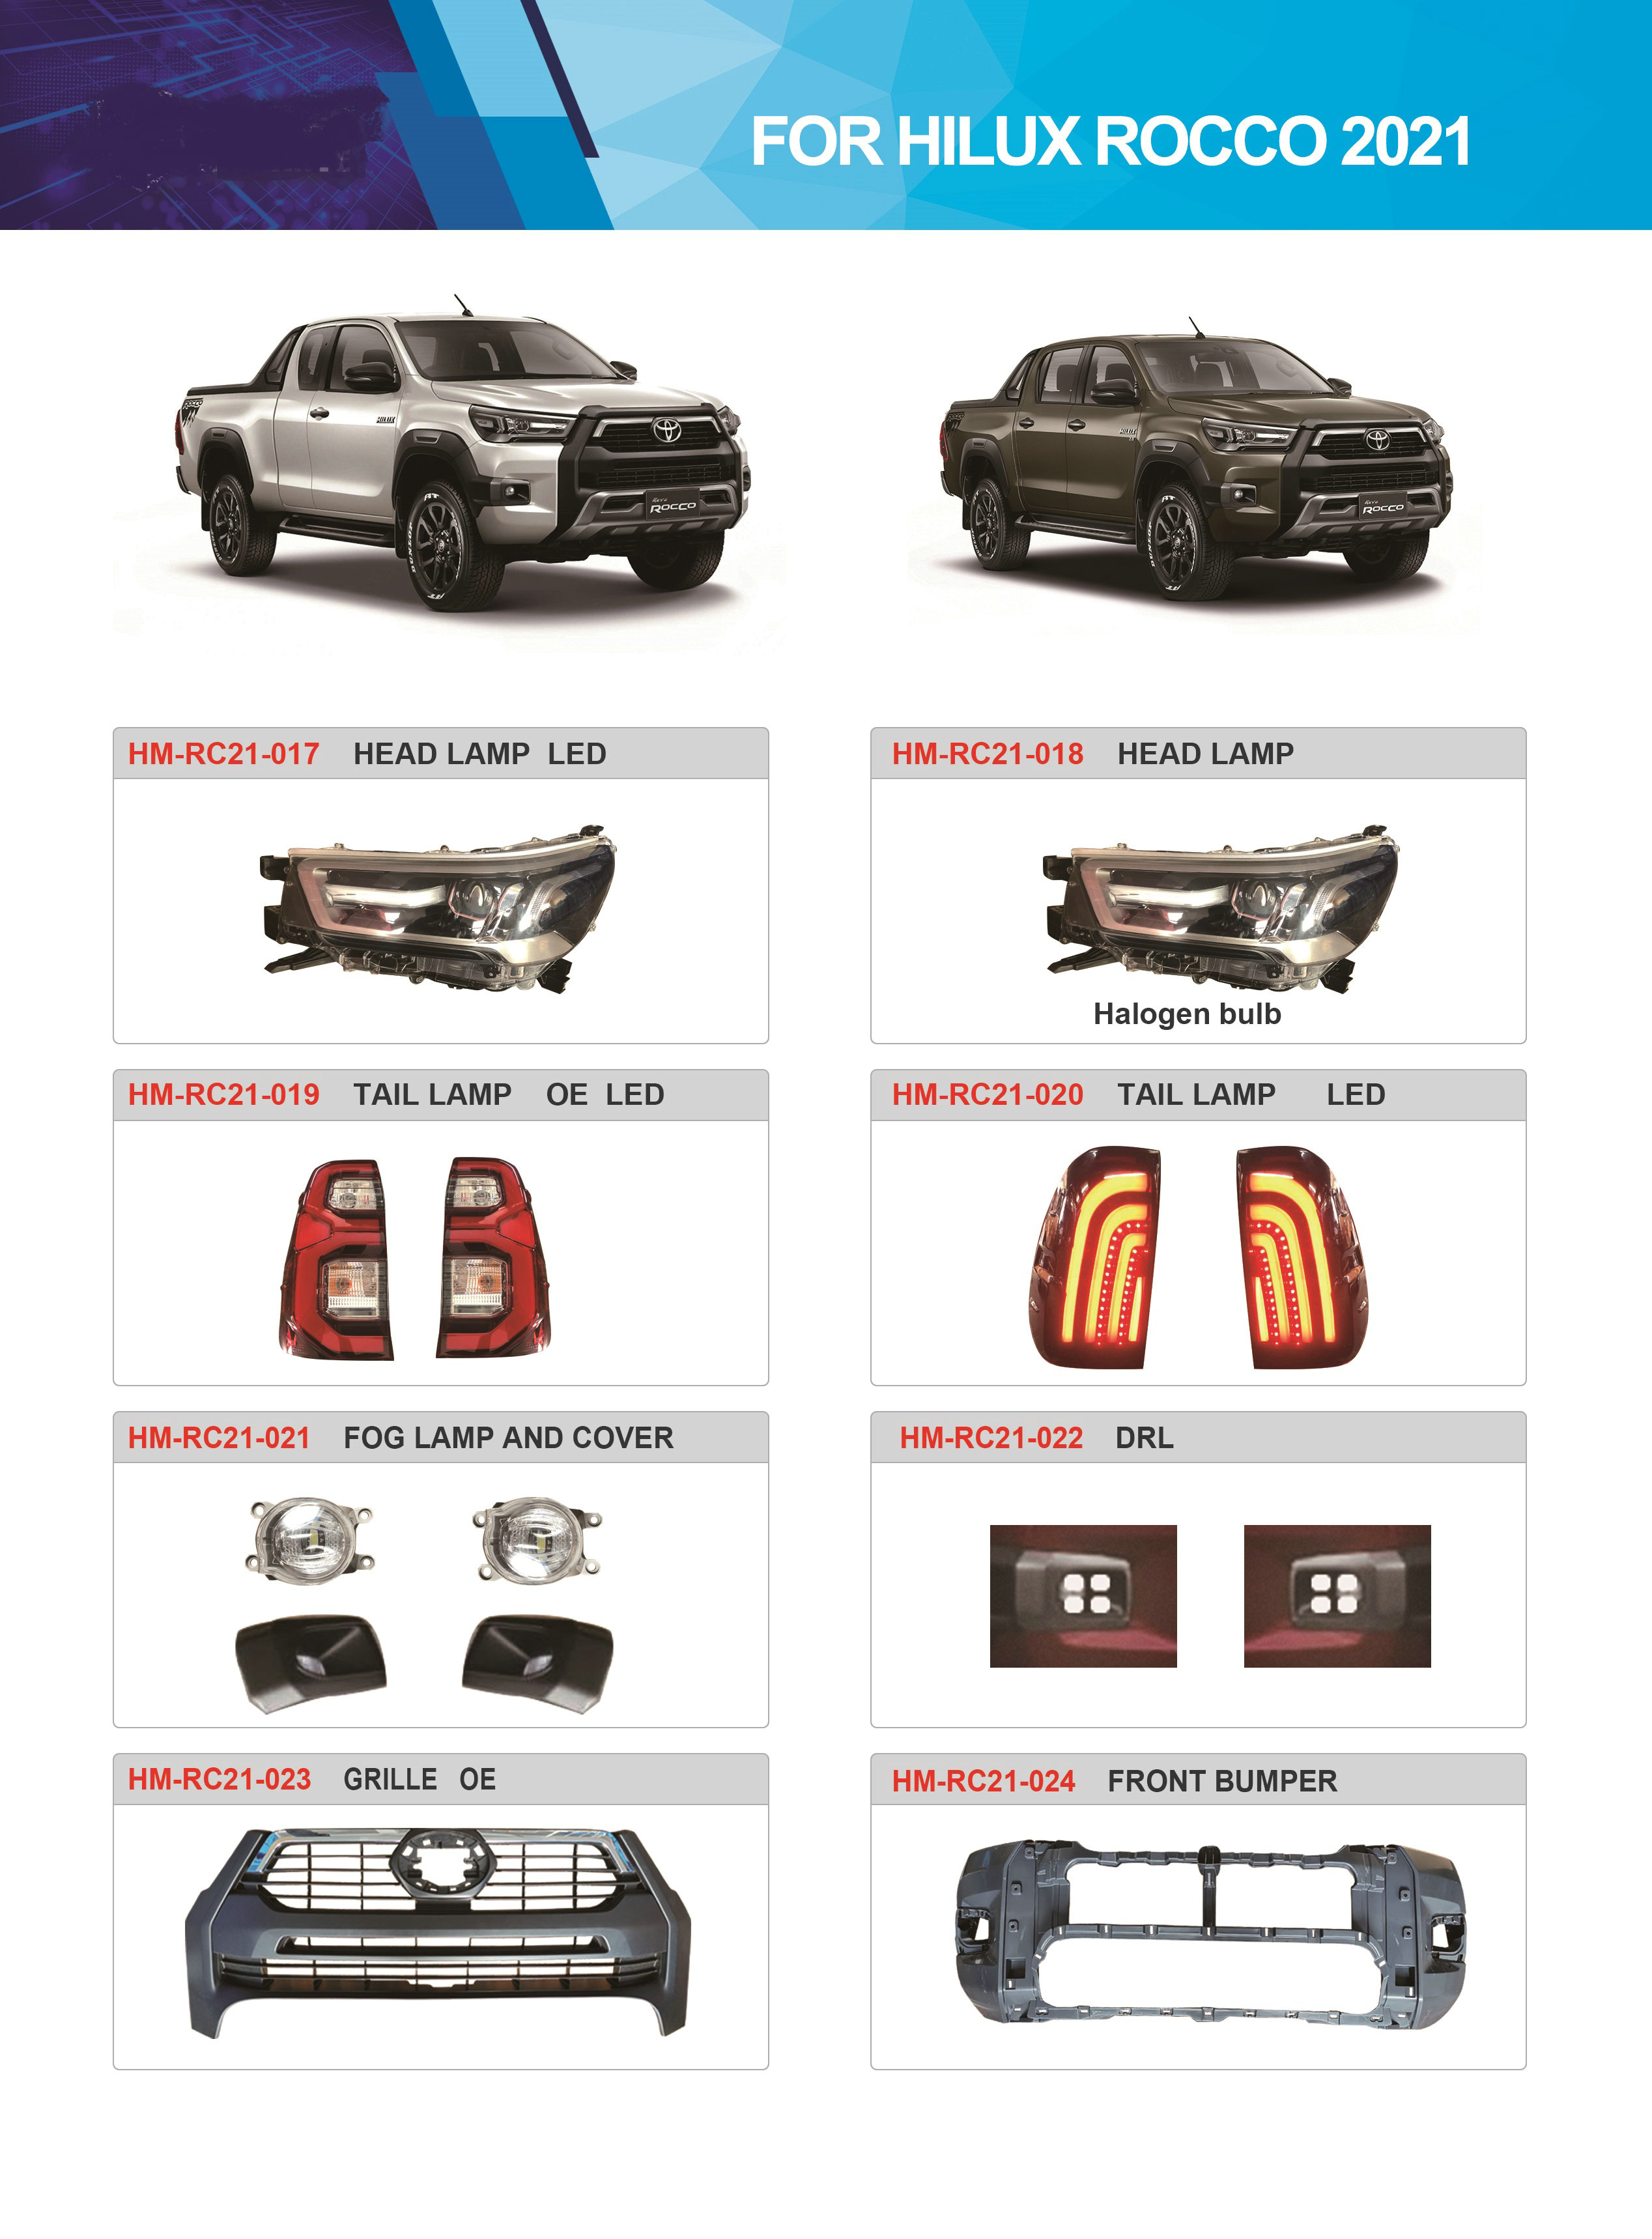 For Hilux Rocco 2021 Featured Image